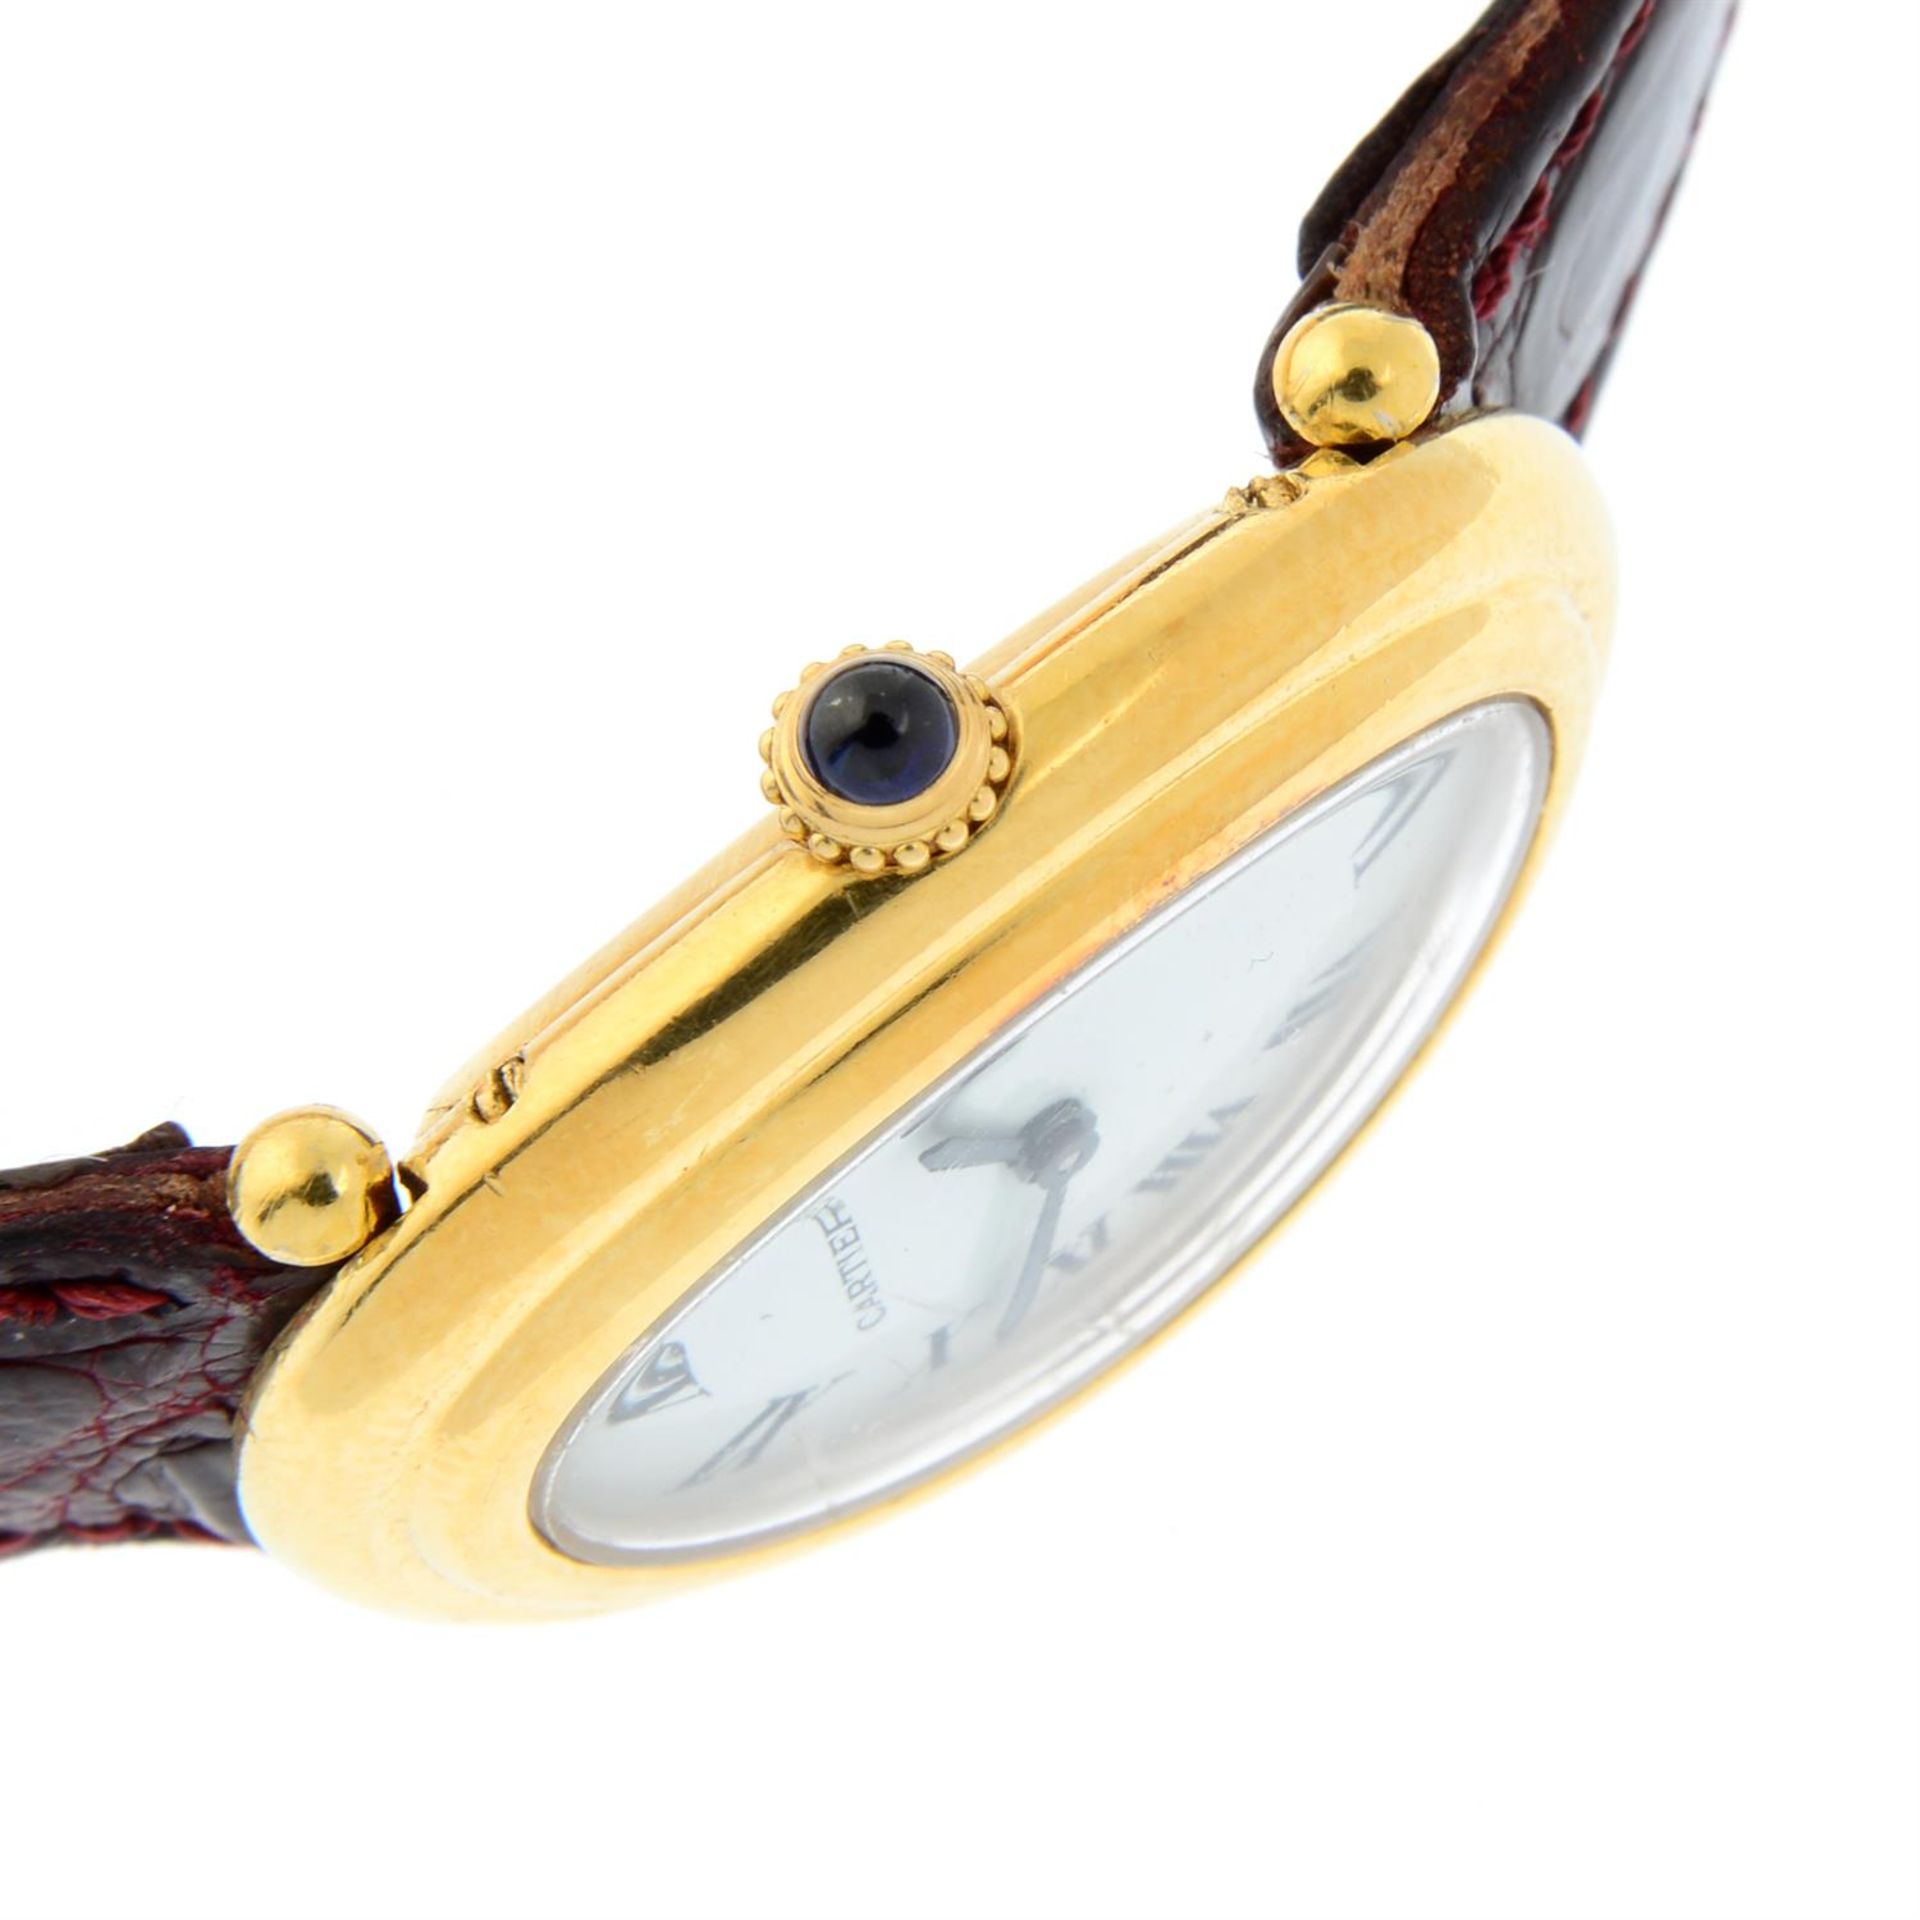 CARTIER - a yellow metal Baignoire wrist watch, 22mm. - Image 3 of 5